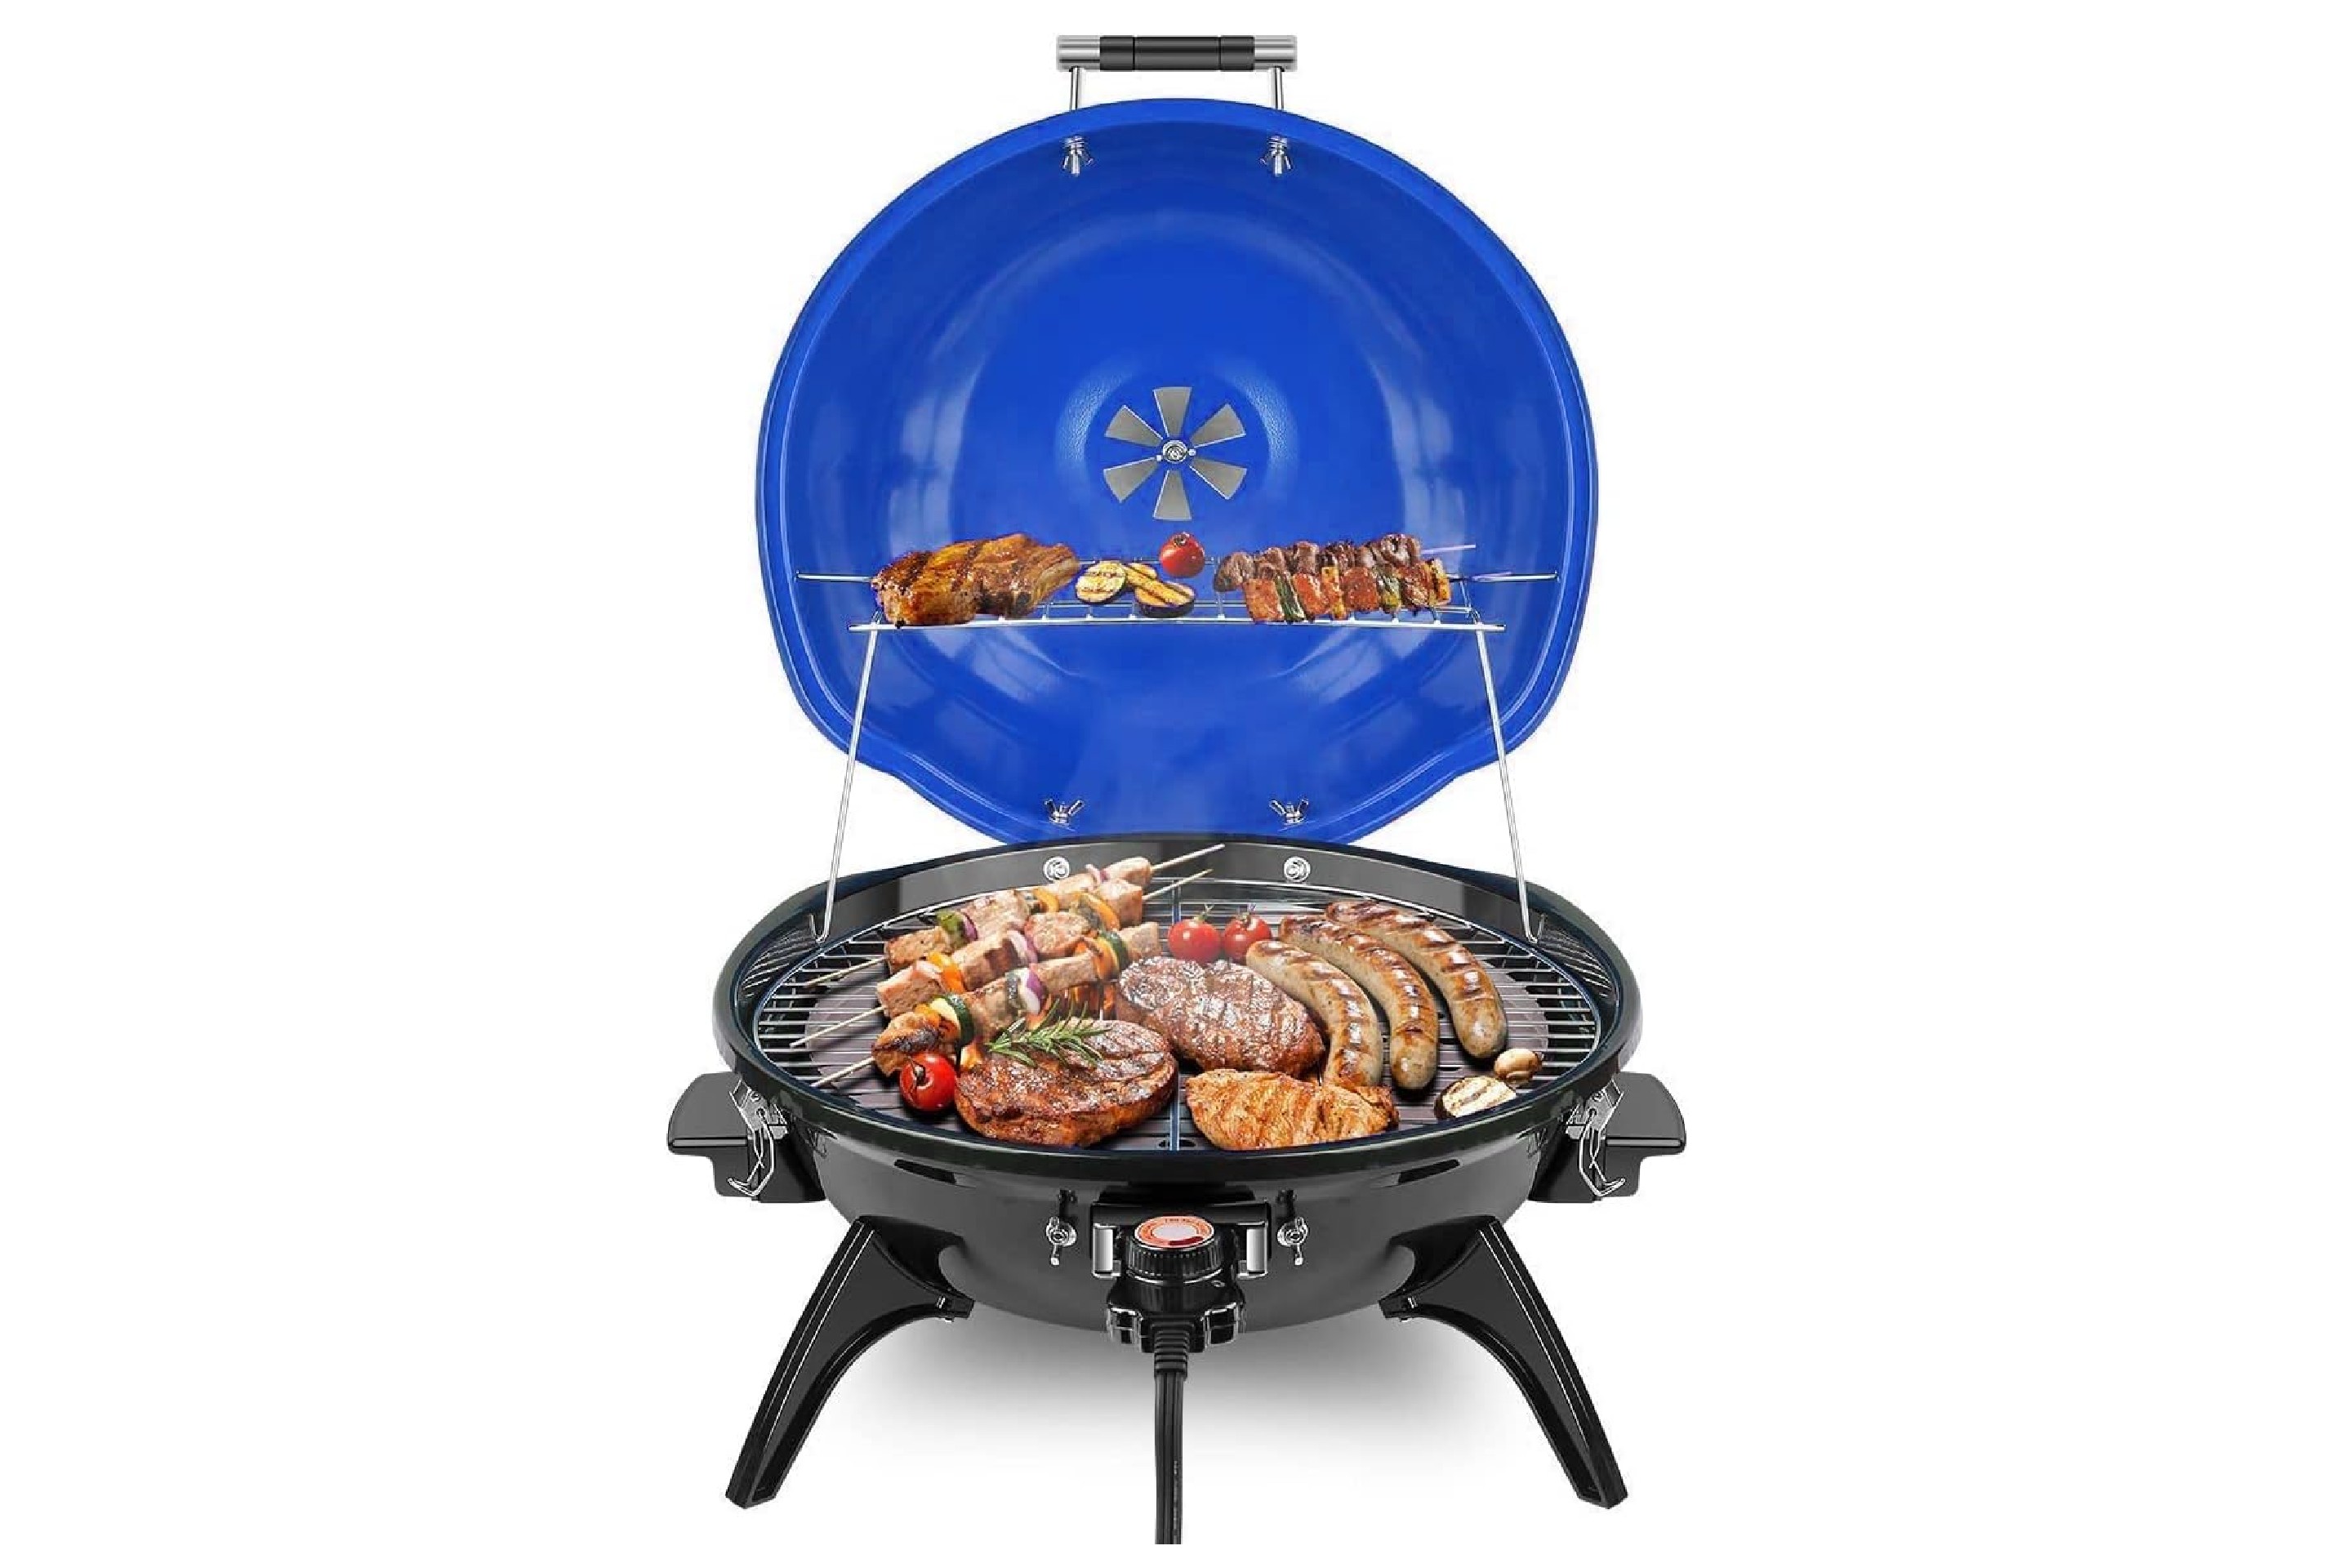 5 electric grills for indoor and outdoor cooking - Reviewed